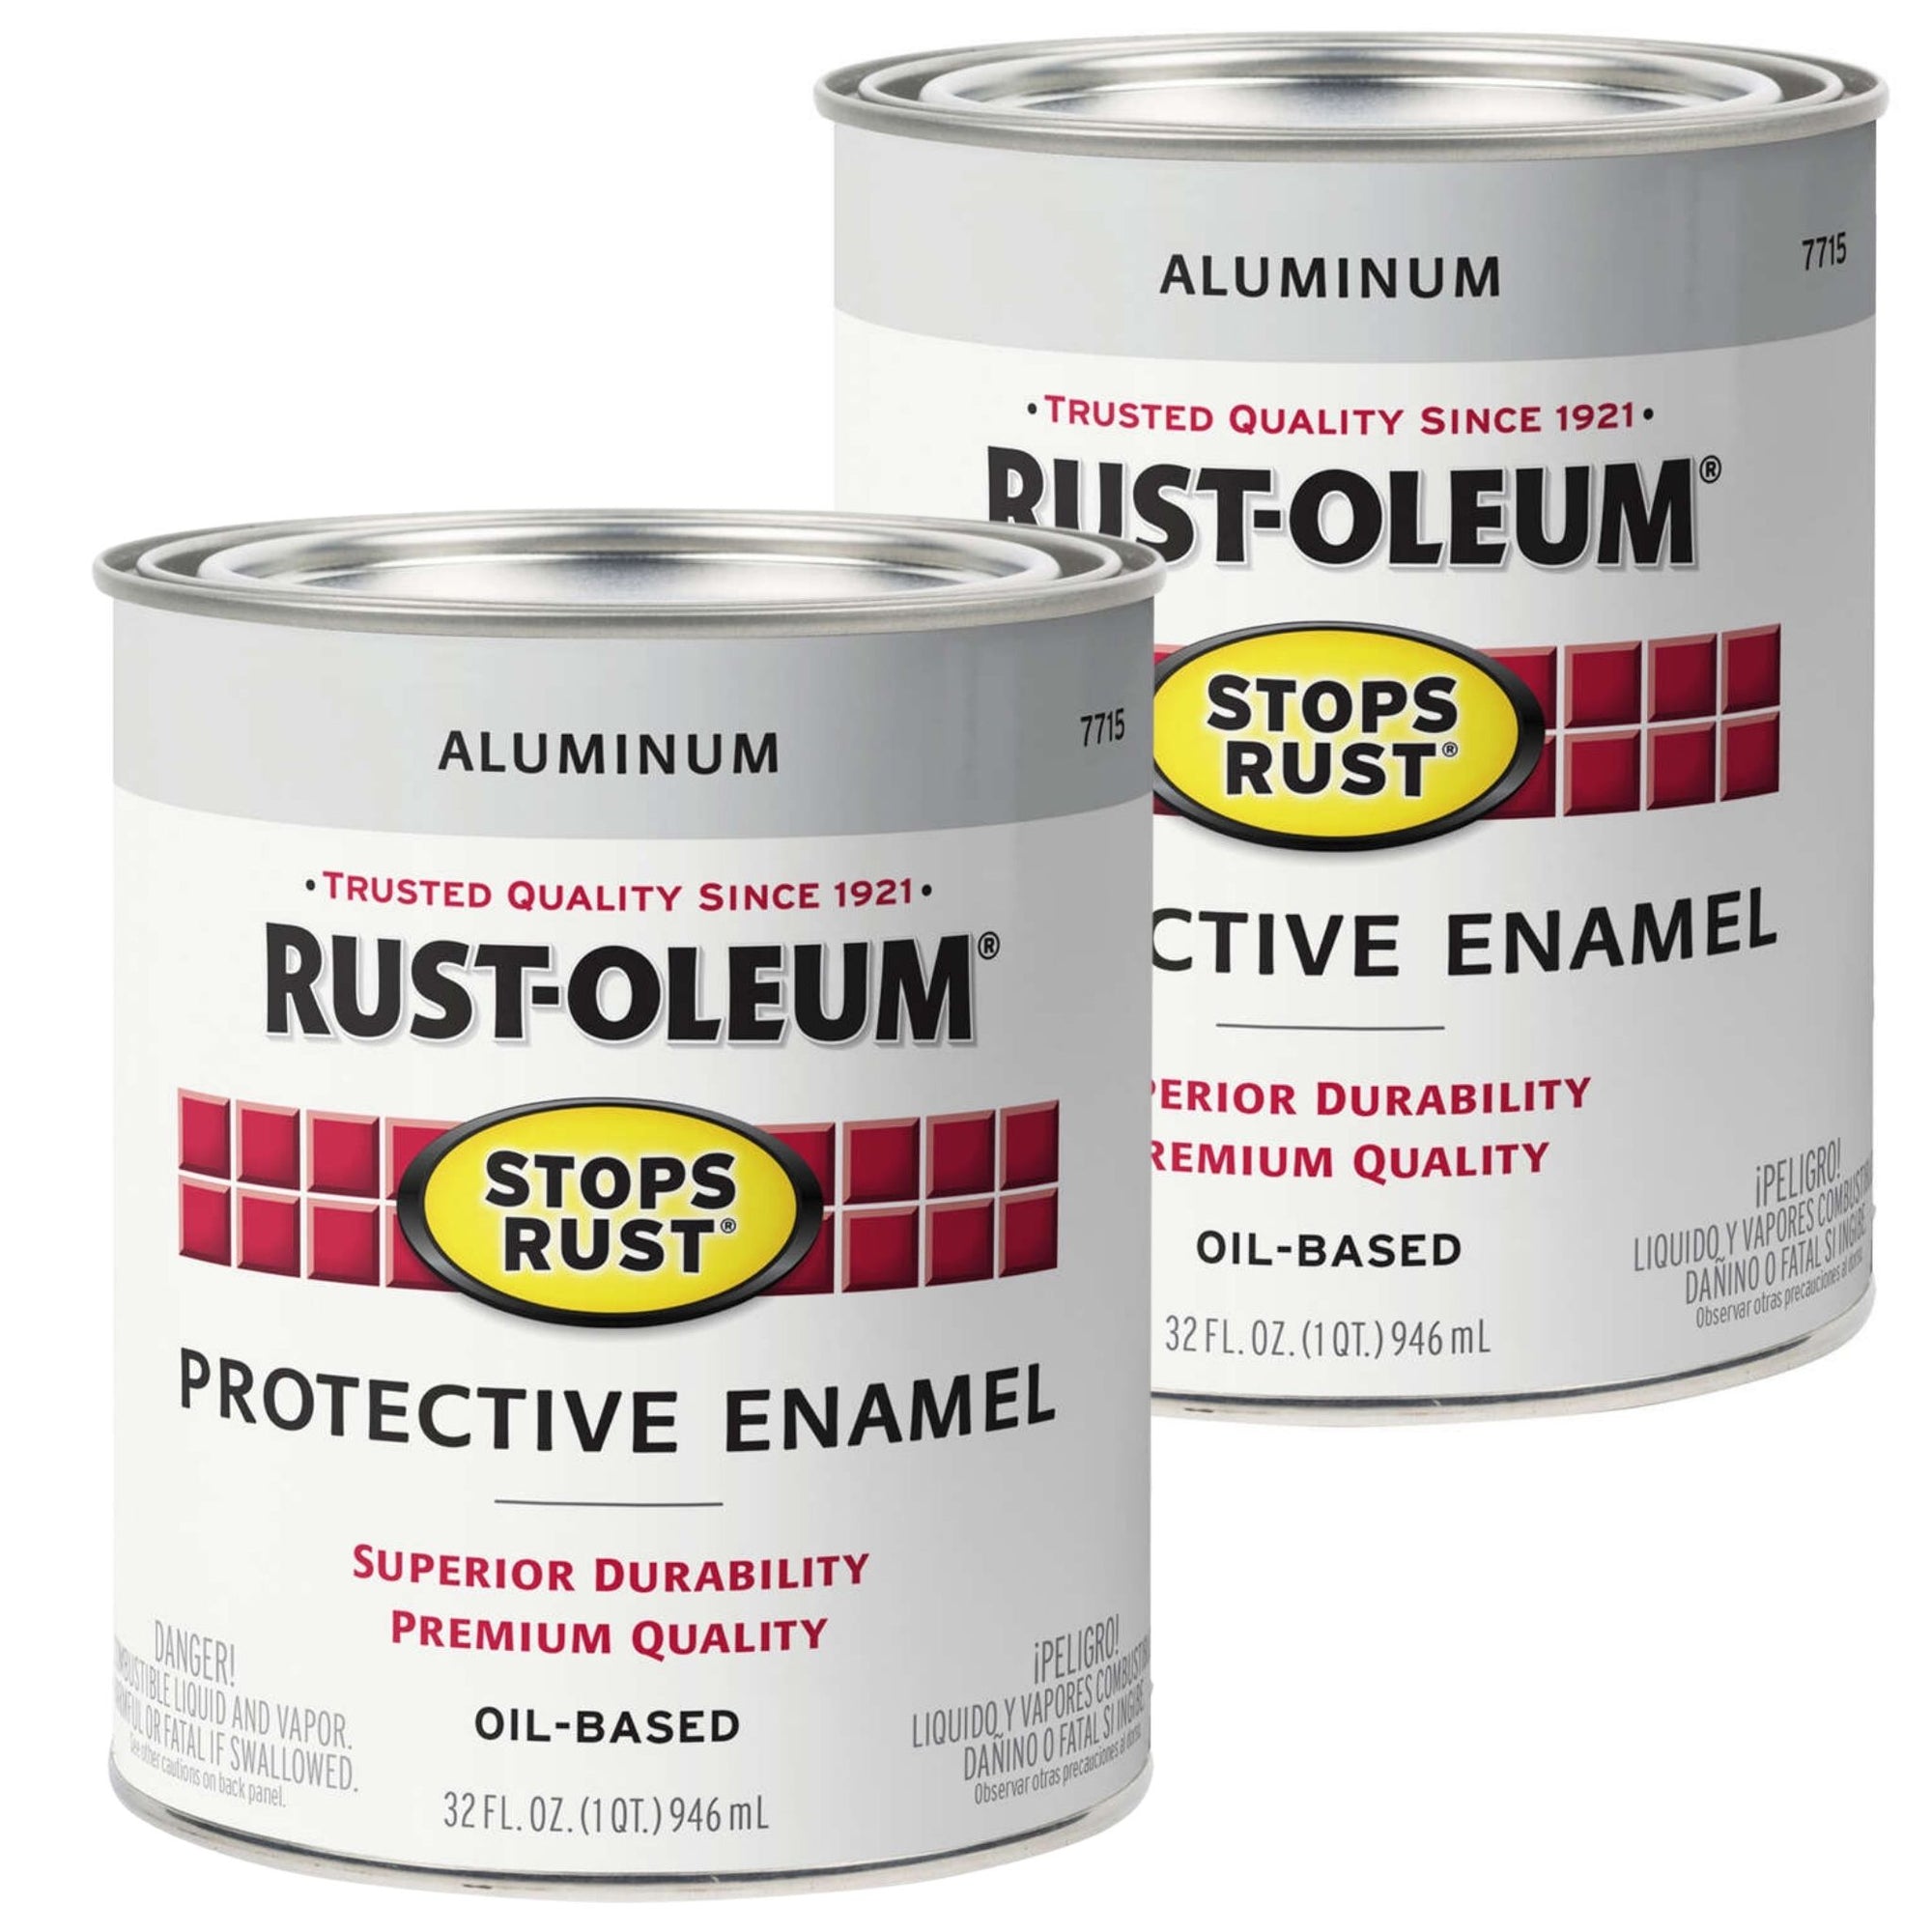 Rustoleum STOPS RUST AND RUST PREVENTION Hammered Brush-On Paint - 946ml (2 PACK) - ALUMINIUM - South East Clearance Centre